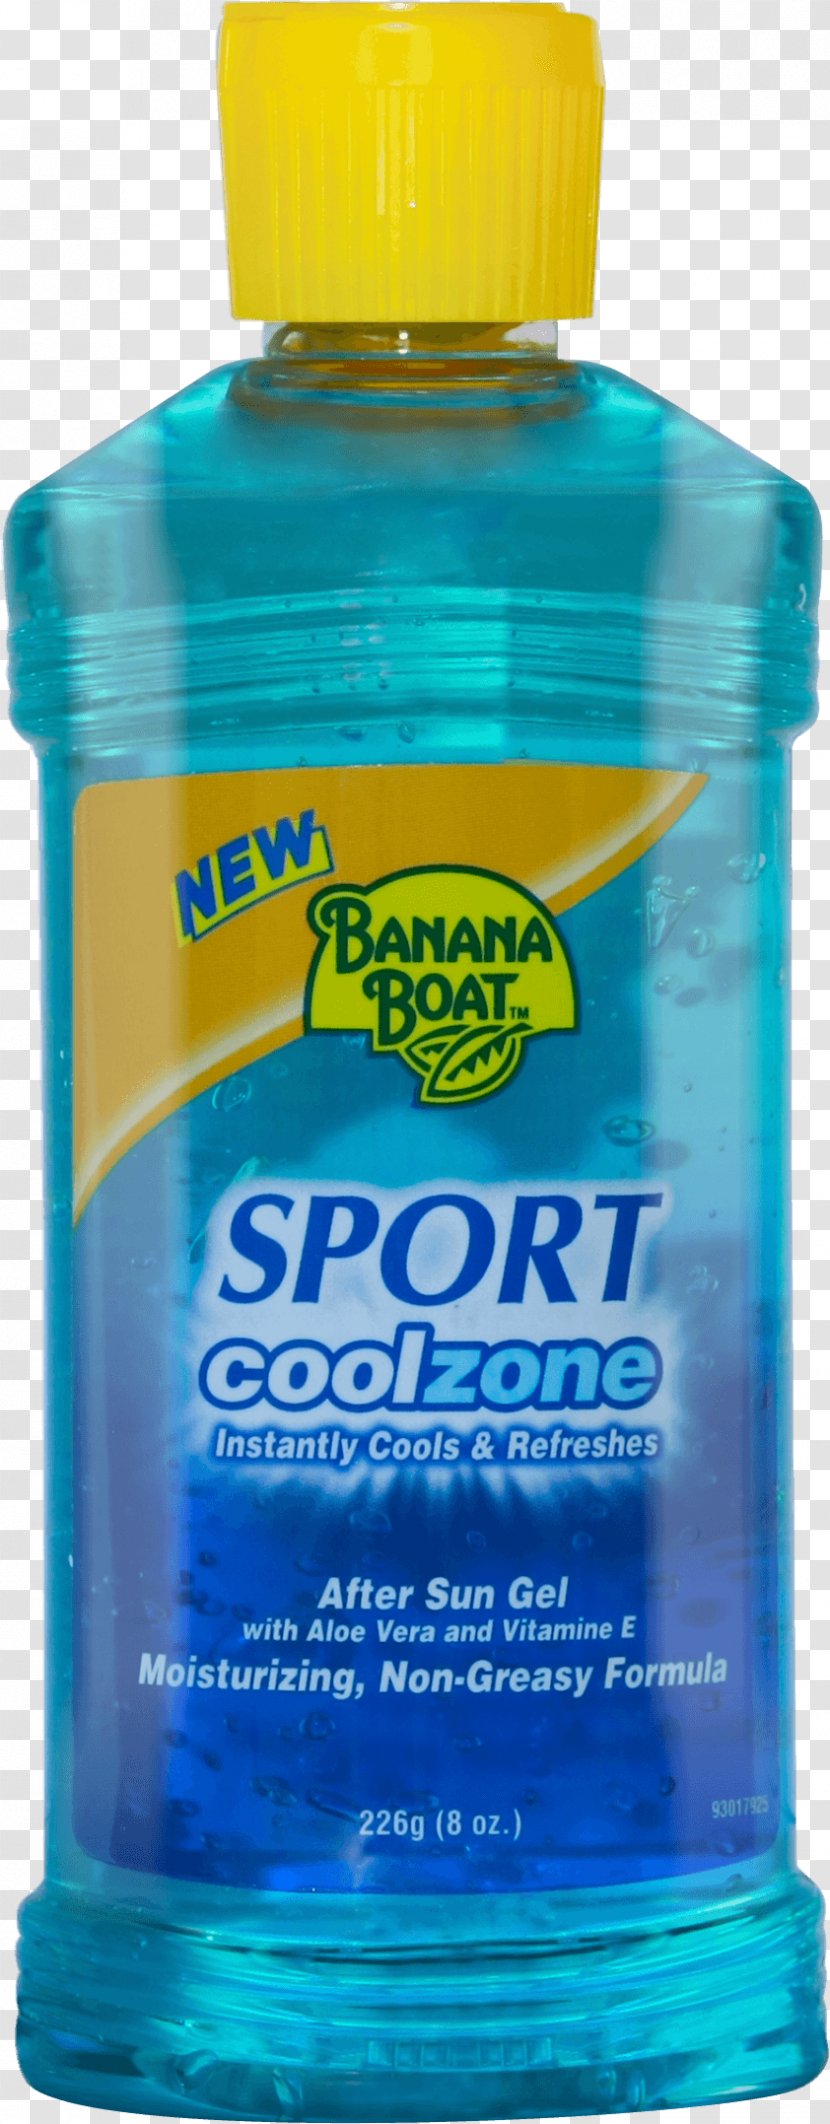 Sunscreen Lotion Banana Boat Soothing Aloe After Sun Gel After-sun - Imopharm Vera 997 Transparent PNG